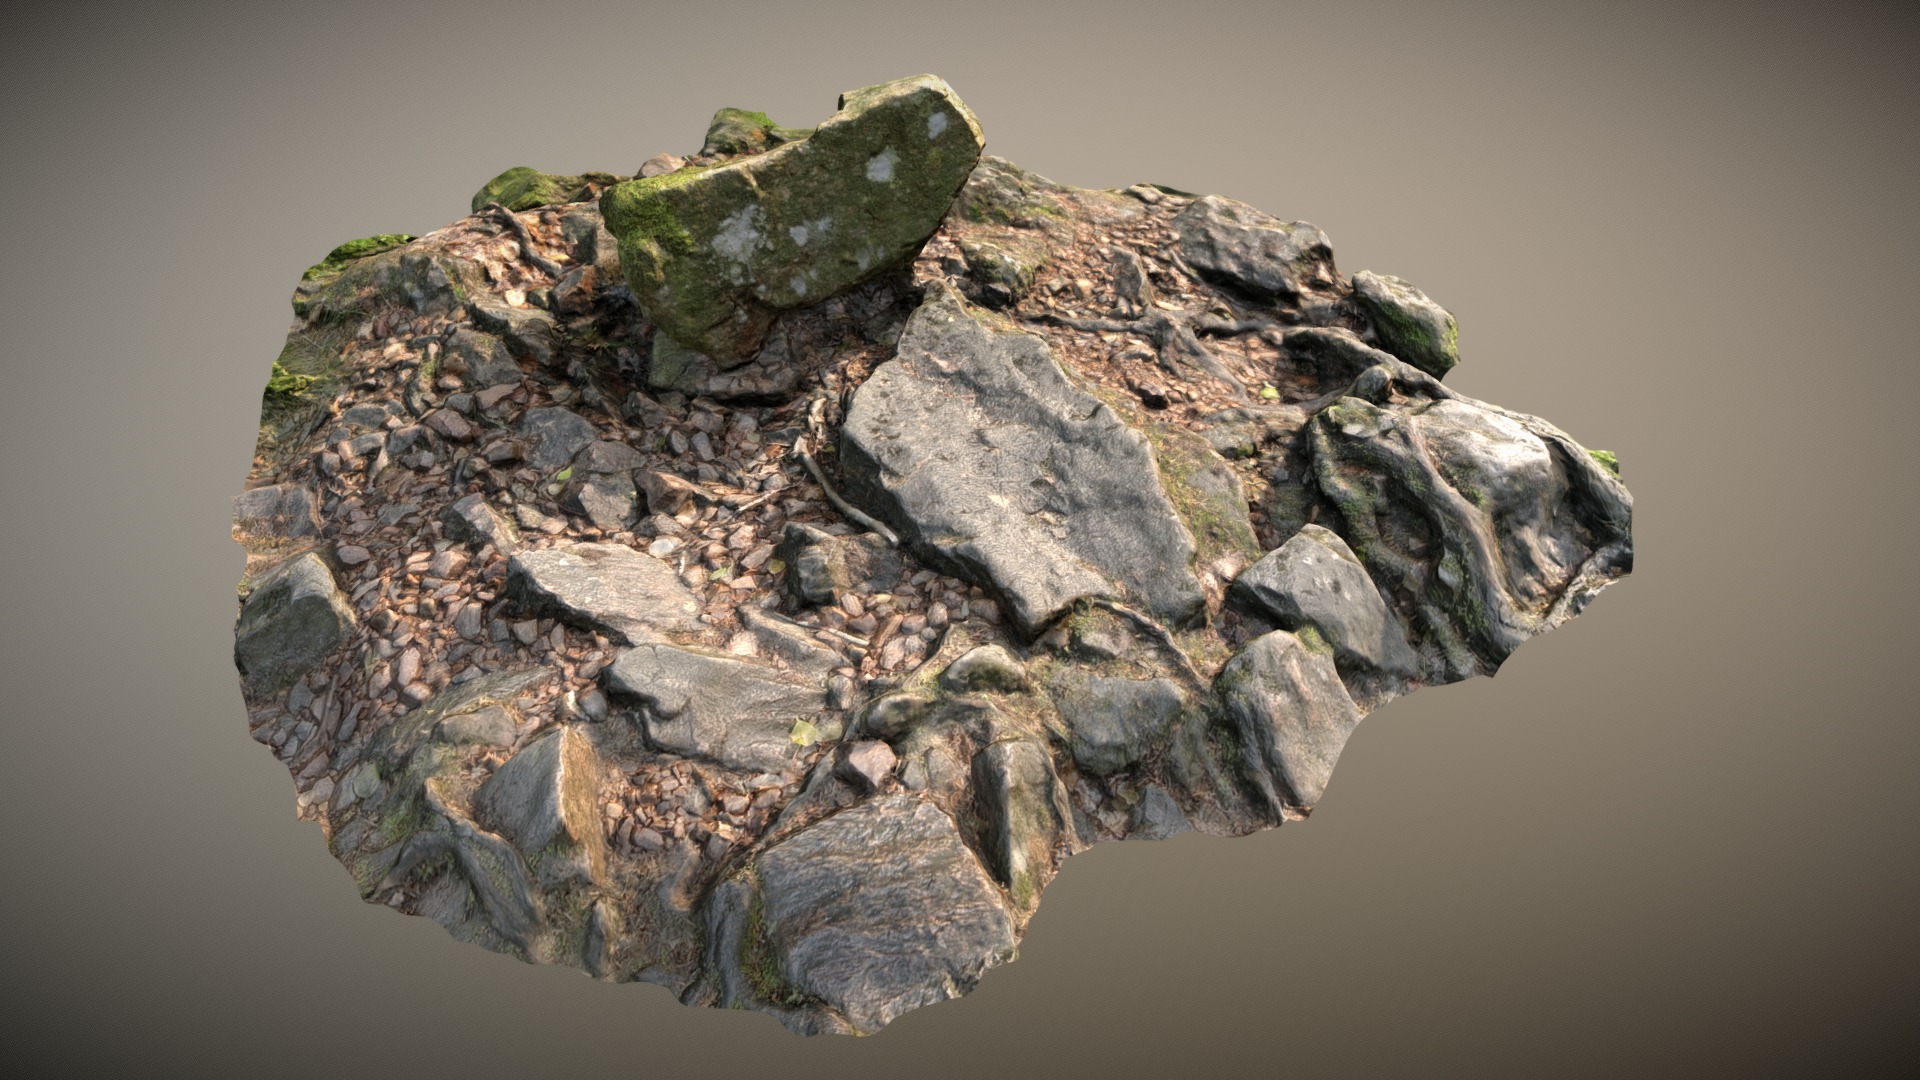 Ground stones D
3d scanned stones/ground

(1 meshes)
Poly 14915
Vert 15065 - Ground Stones D - Buy Royalty Free 3D model by 3drille 3d model